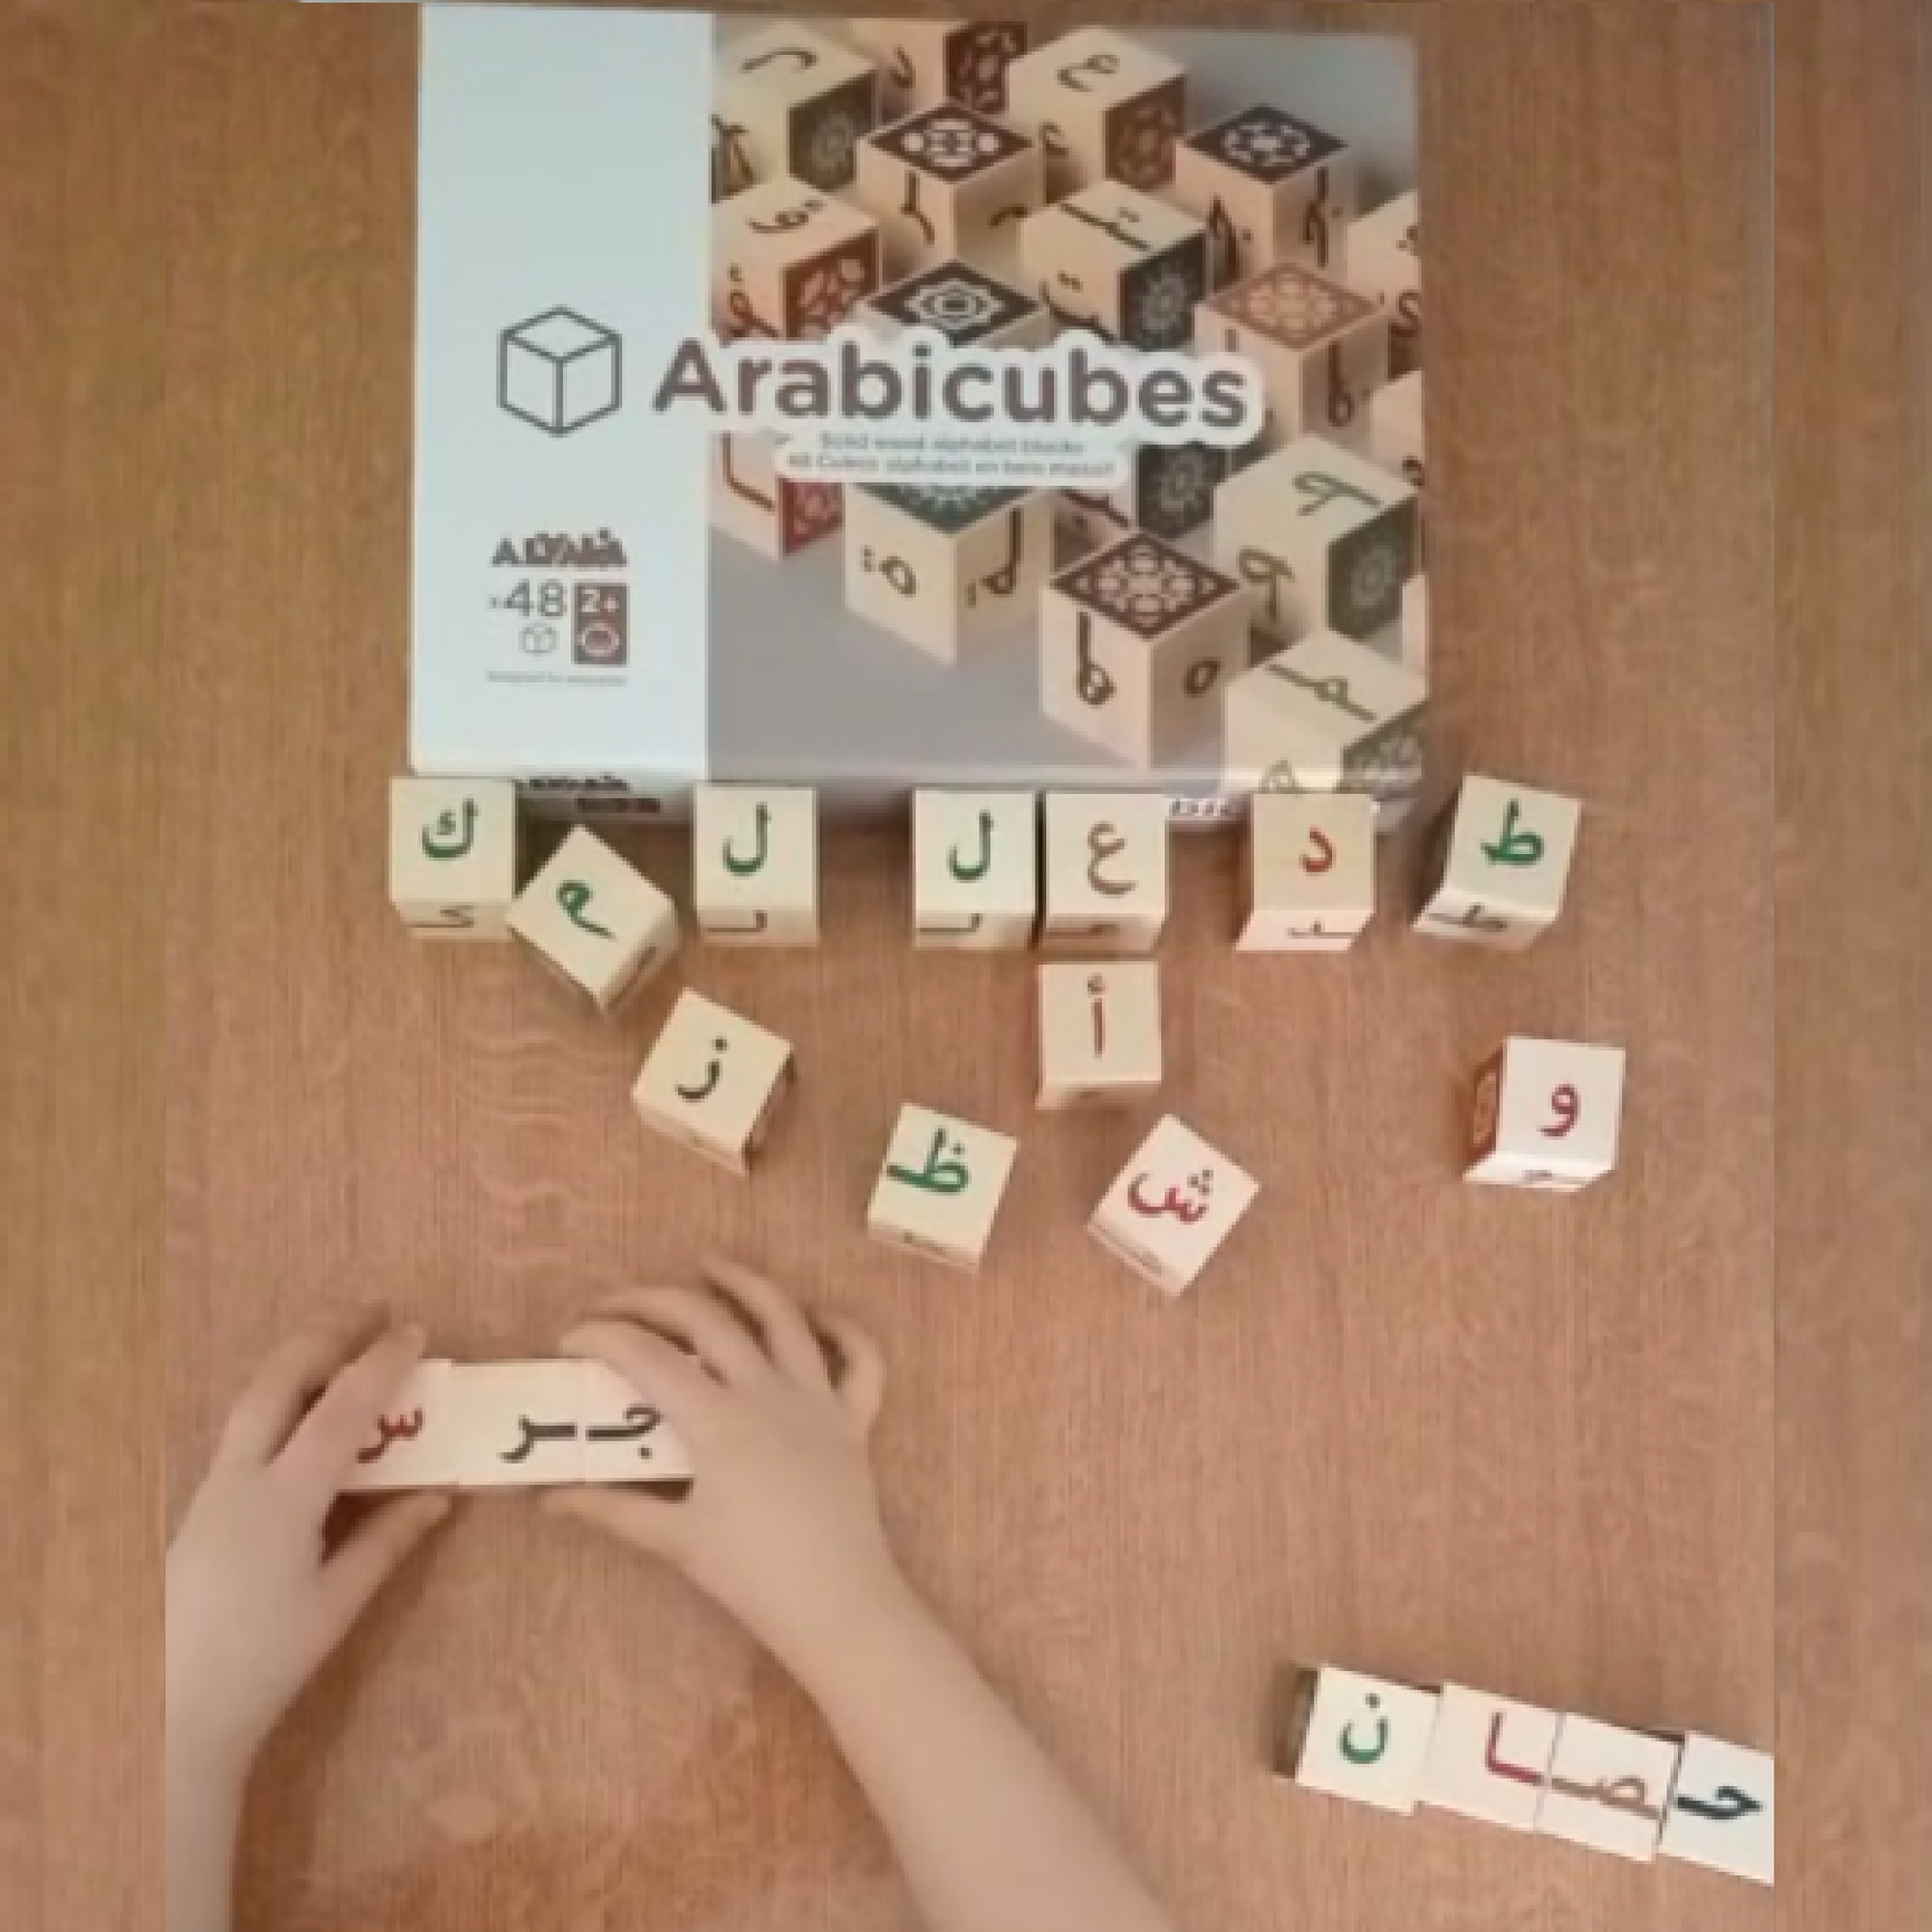 How Arabicubes are helping children with learning difficulties, learn Arabic?